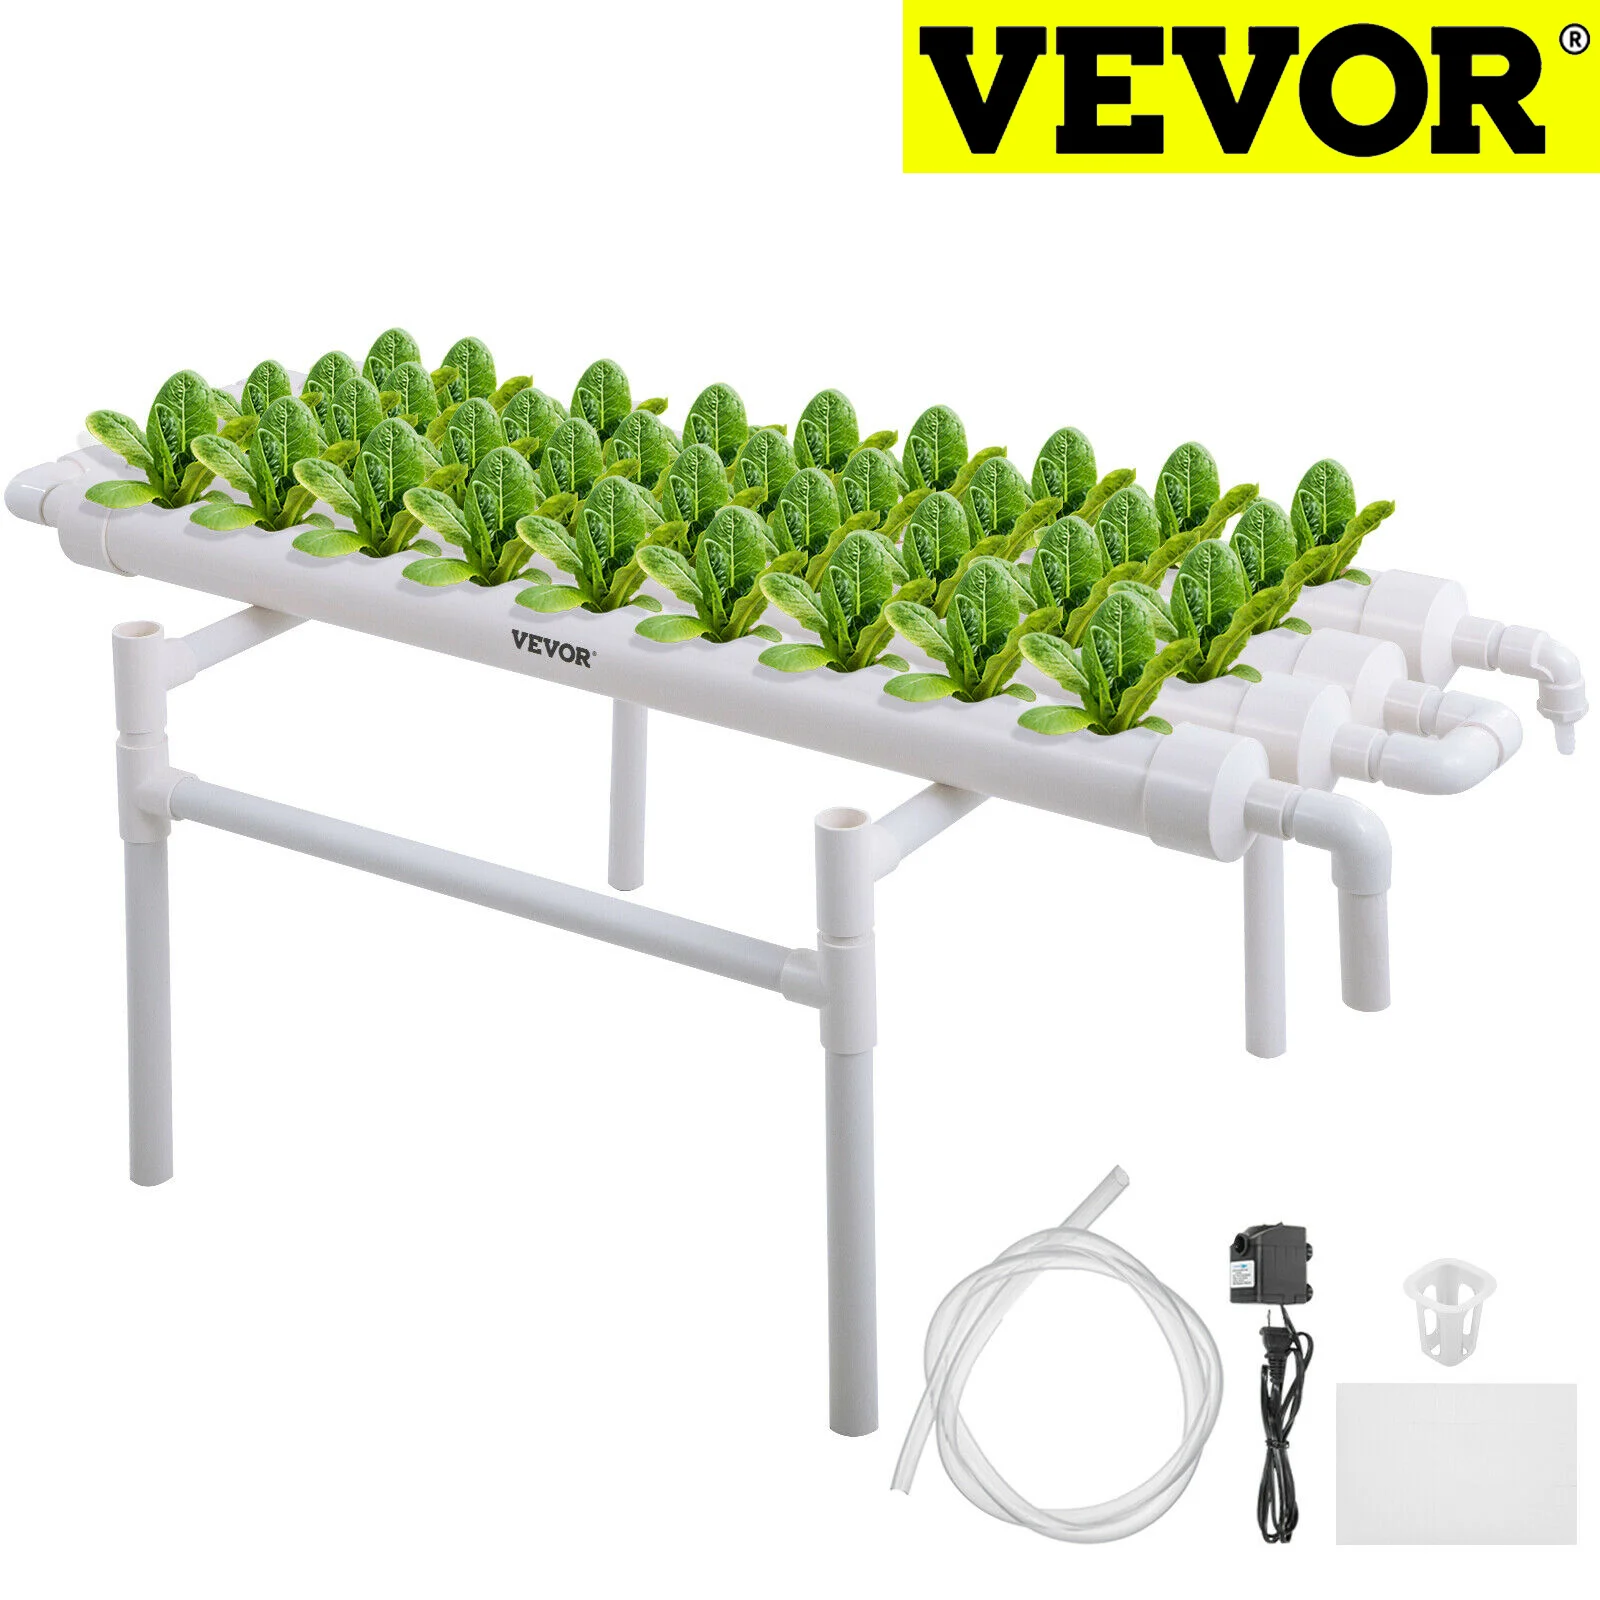 Sidasu Hydroponic Grow Kit 90 Sites 10 Pipes Hydroponic Planting Equipment Ebb and Flow Deep Water Culture Balcony Garden System Vegetable Tool Grow Kit 